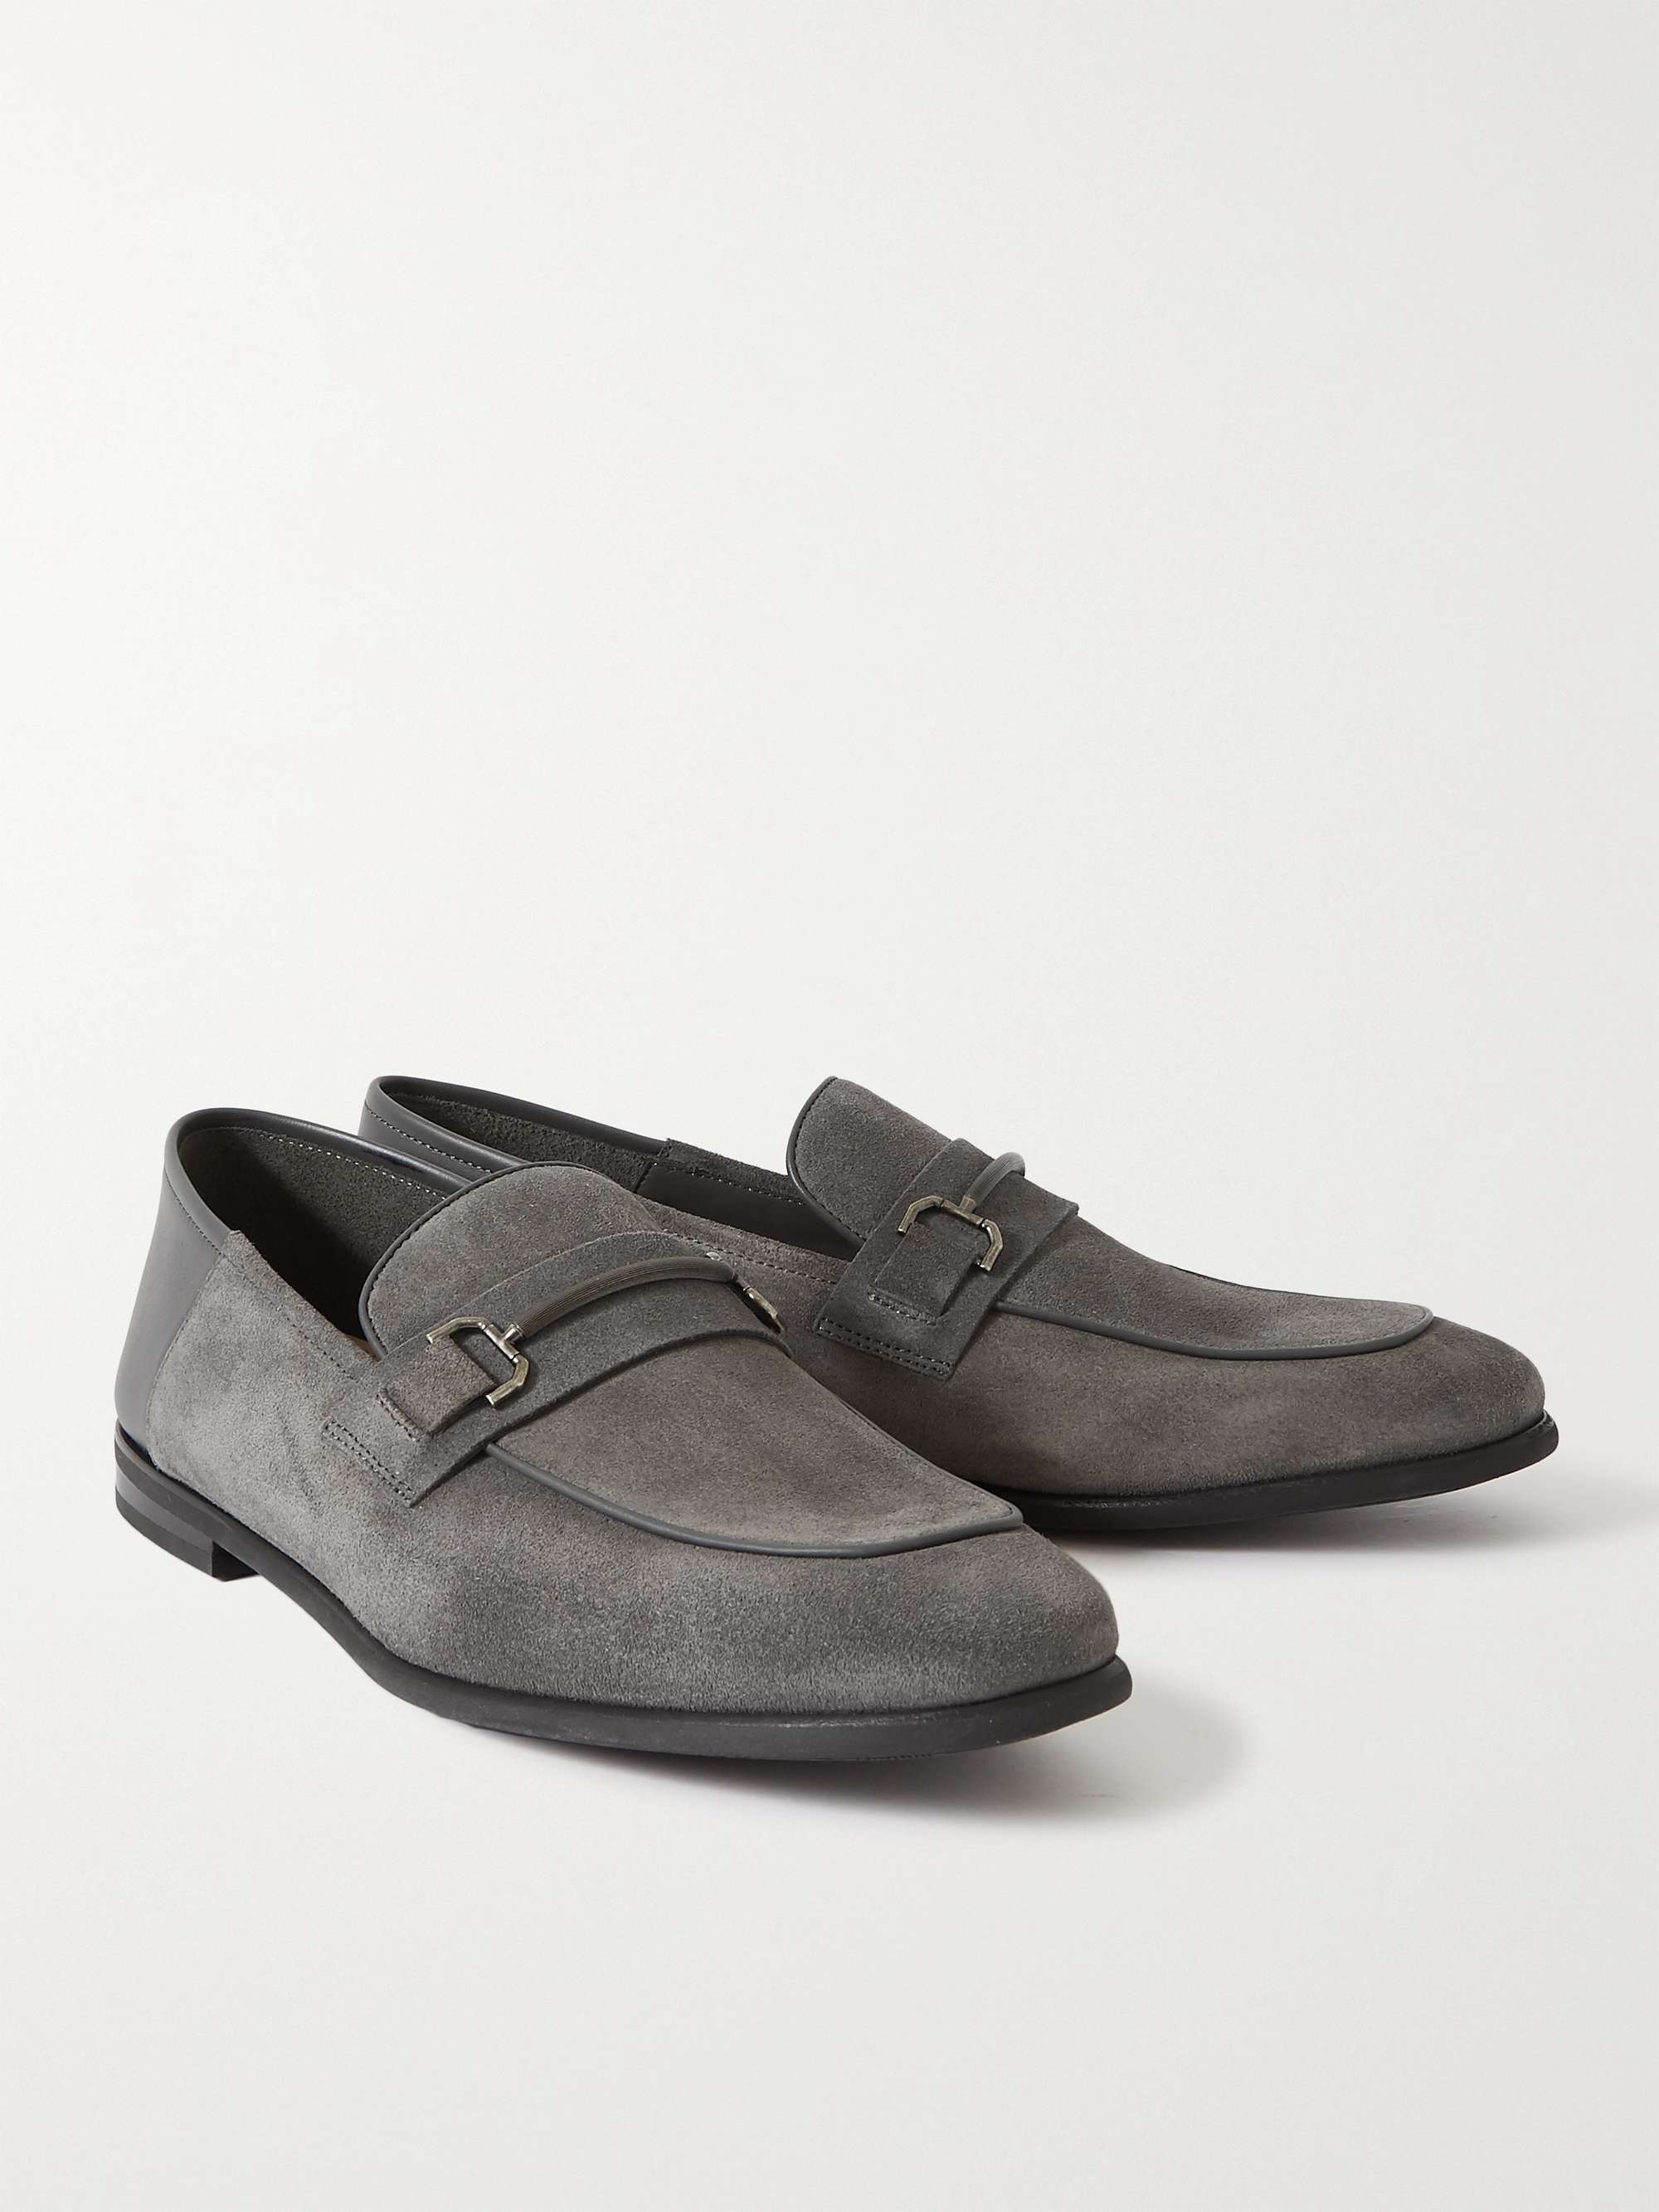 DUNHILL Chiltern Suede and Leather Loafers